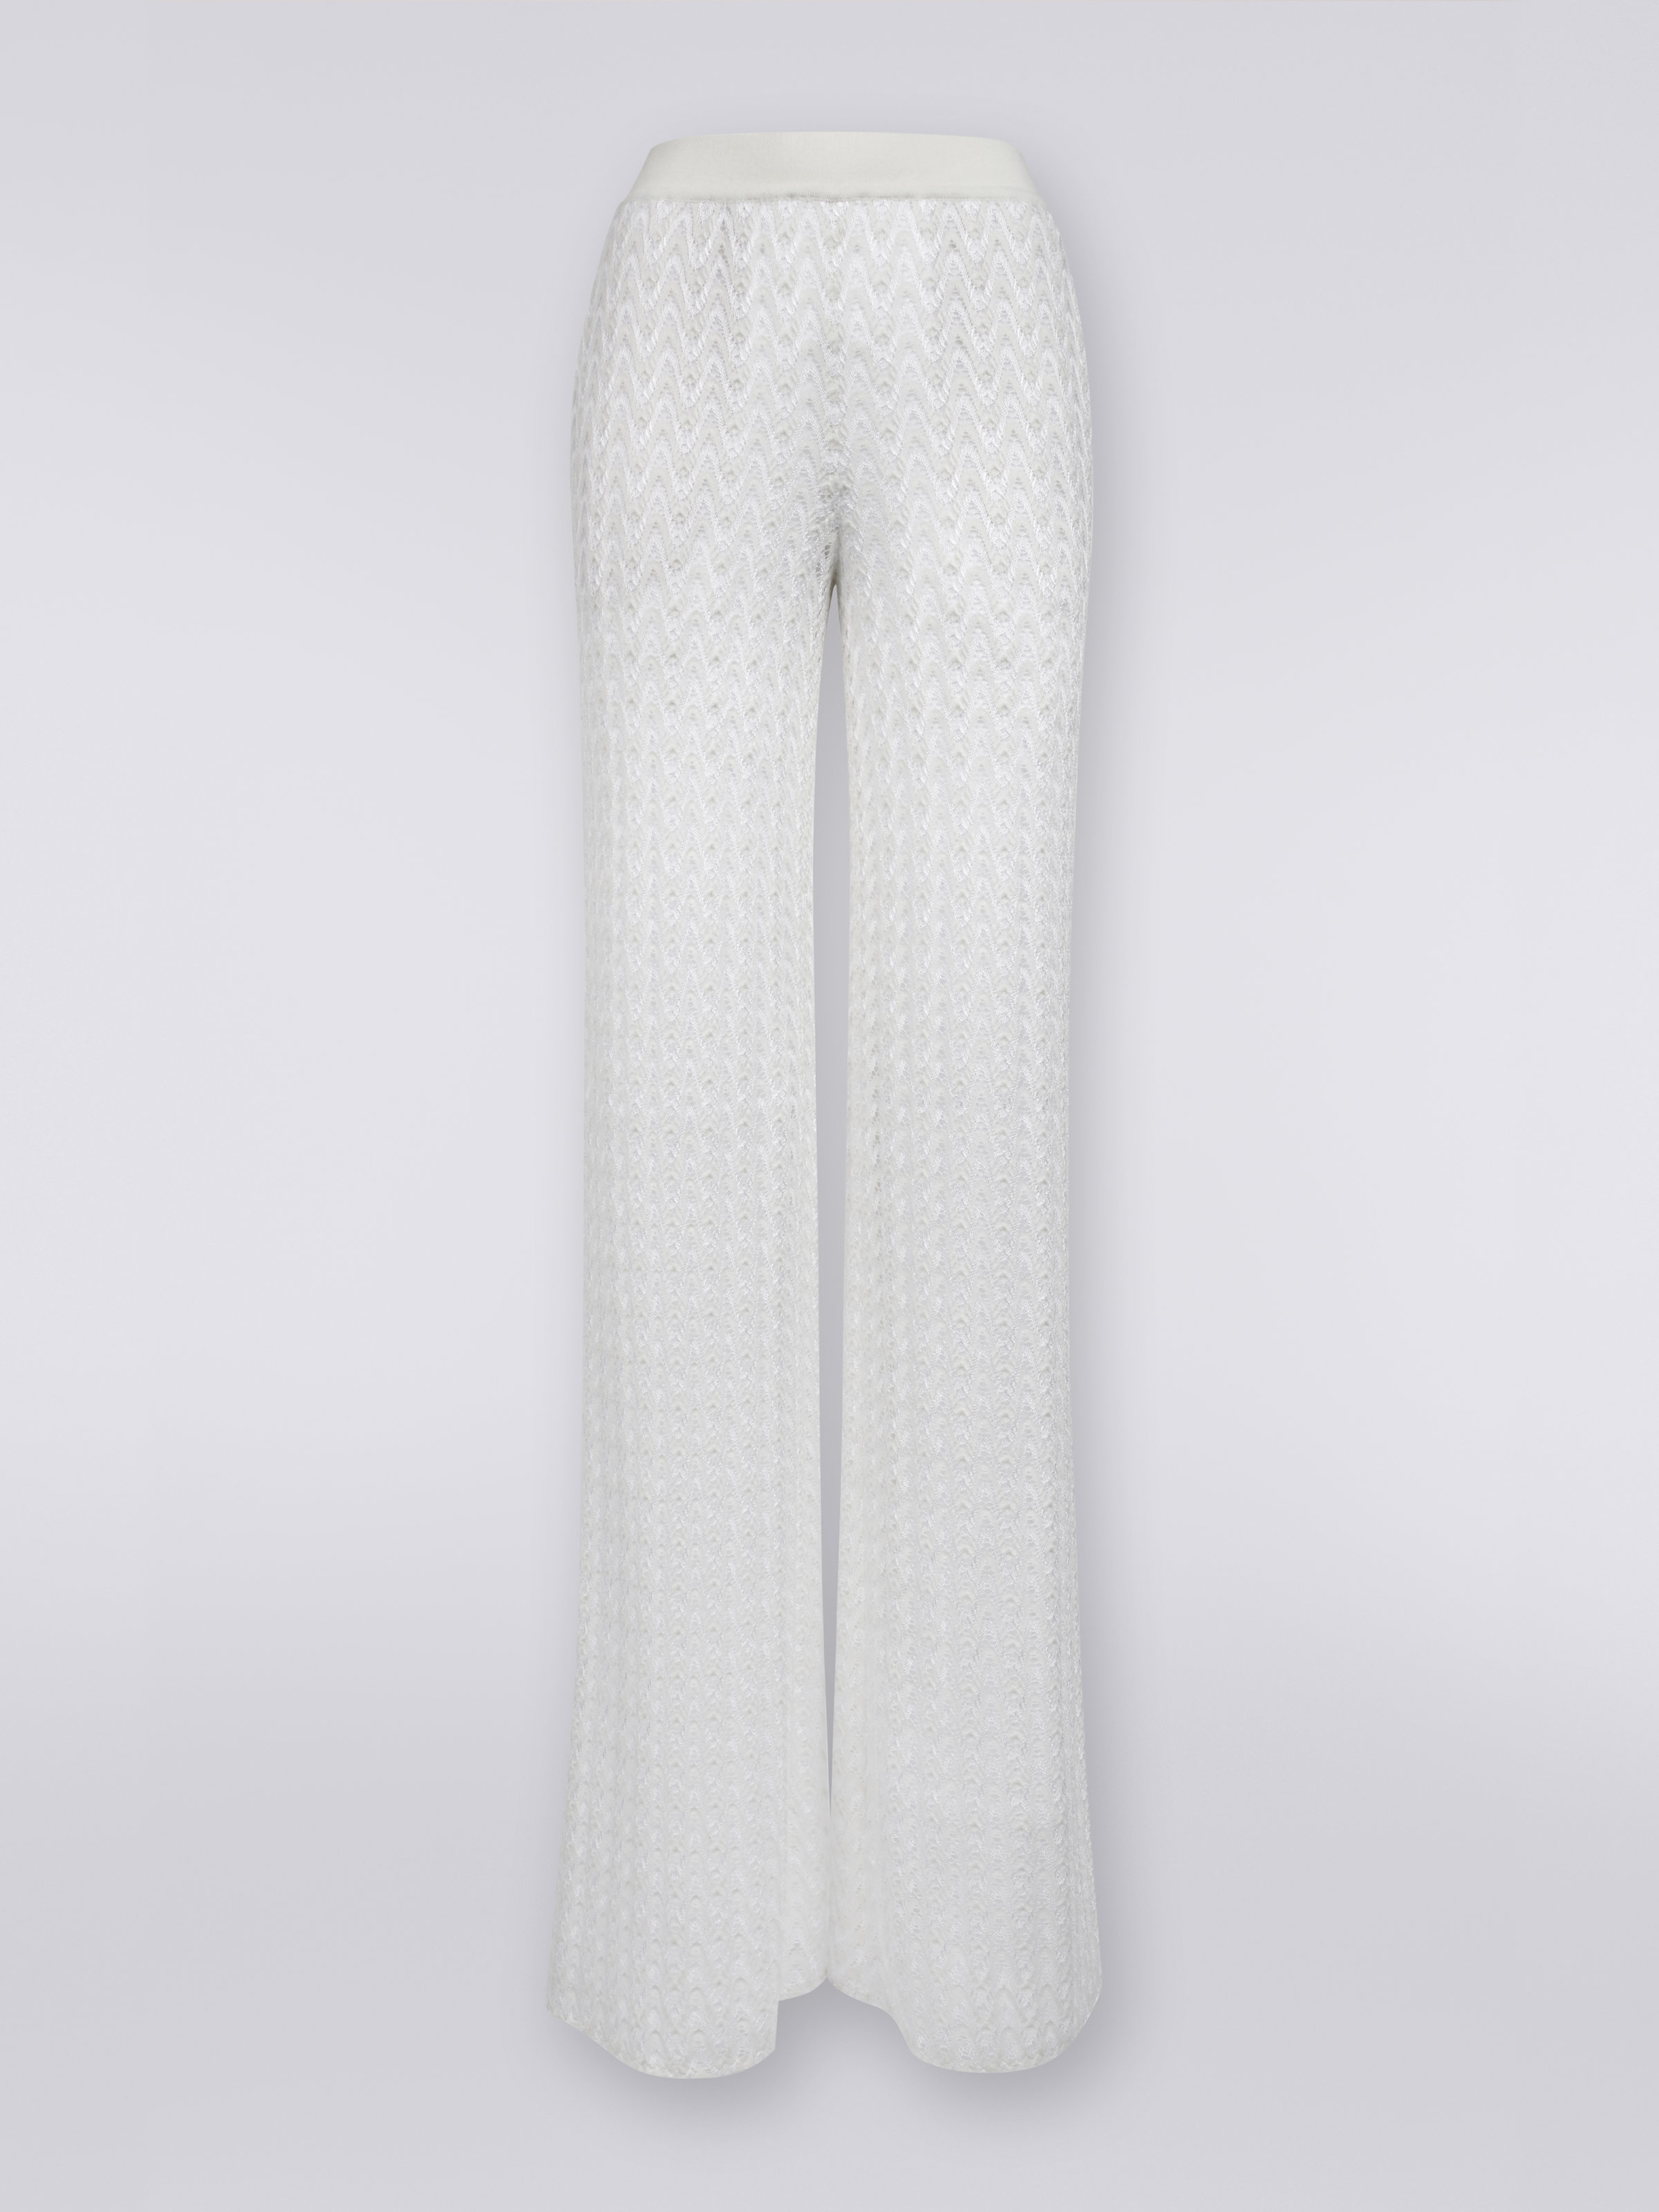 Palazzo pants in raschel knit wool and viscose, White  - 0